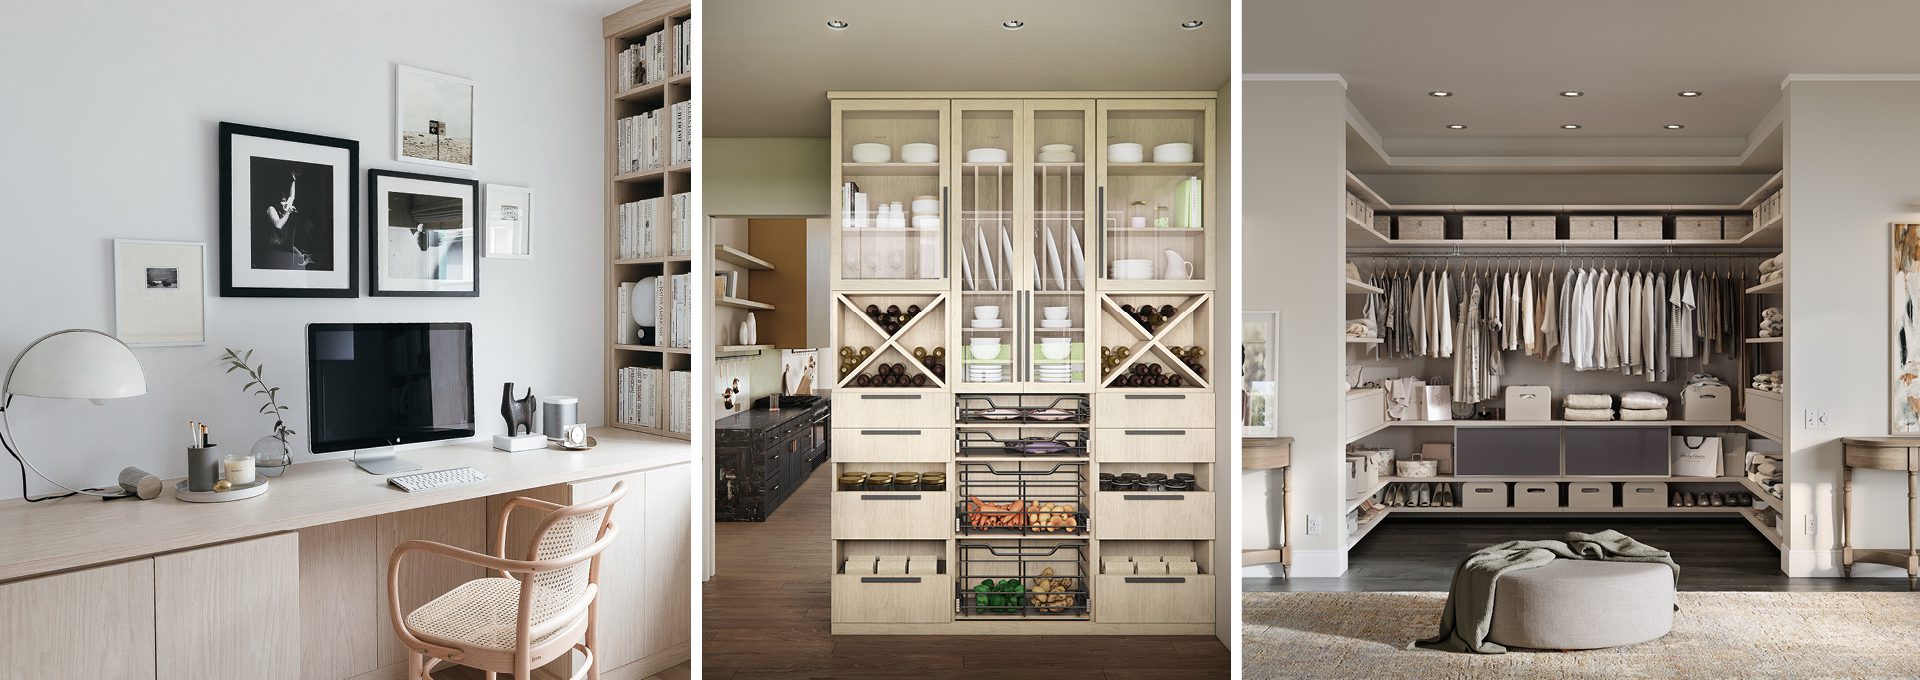 Enjoy the California Closets Spring Promotion Event with up to $2,500 savings for new walk in closet, media center, or kitchen pantry in Charleston.